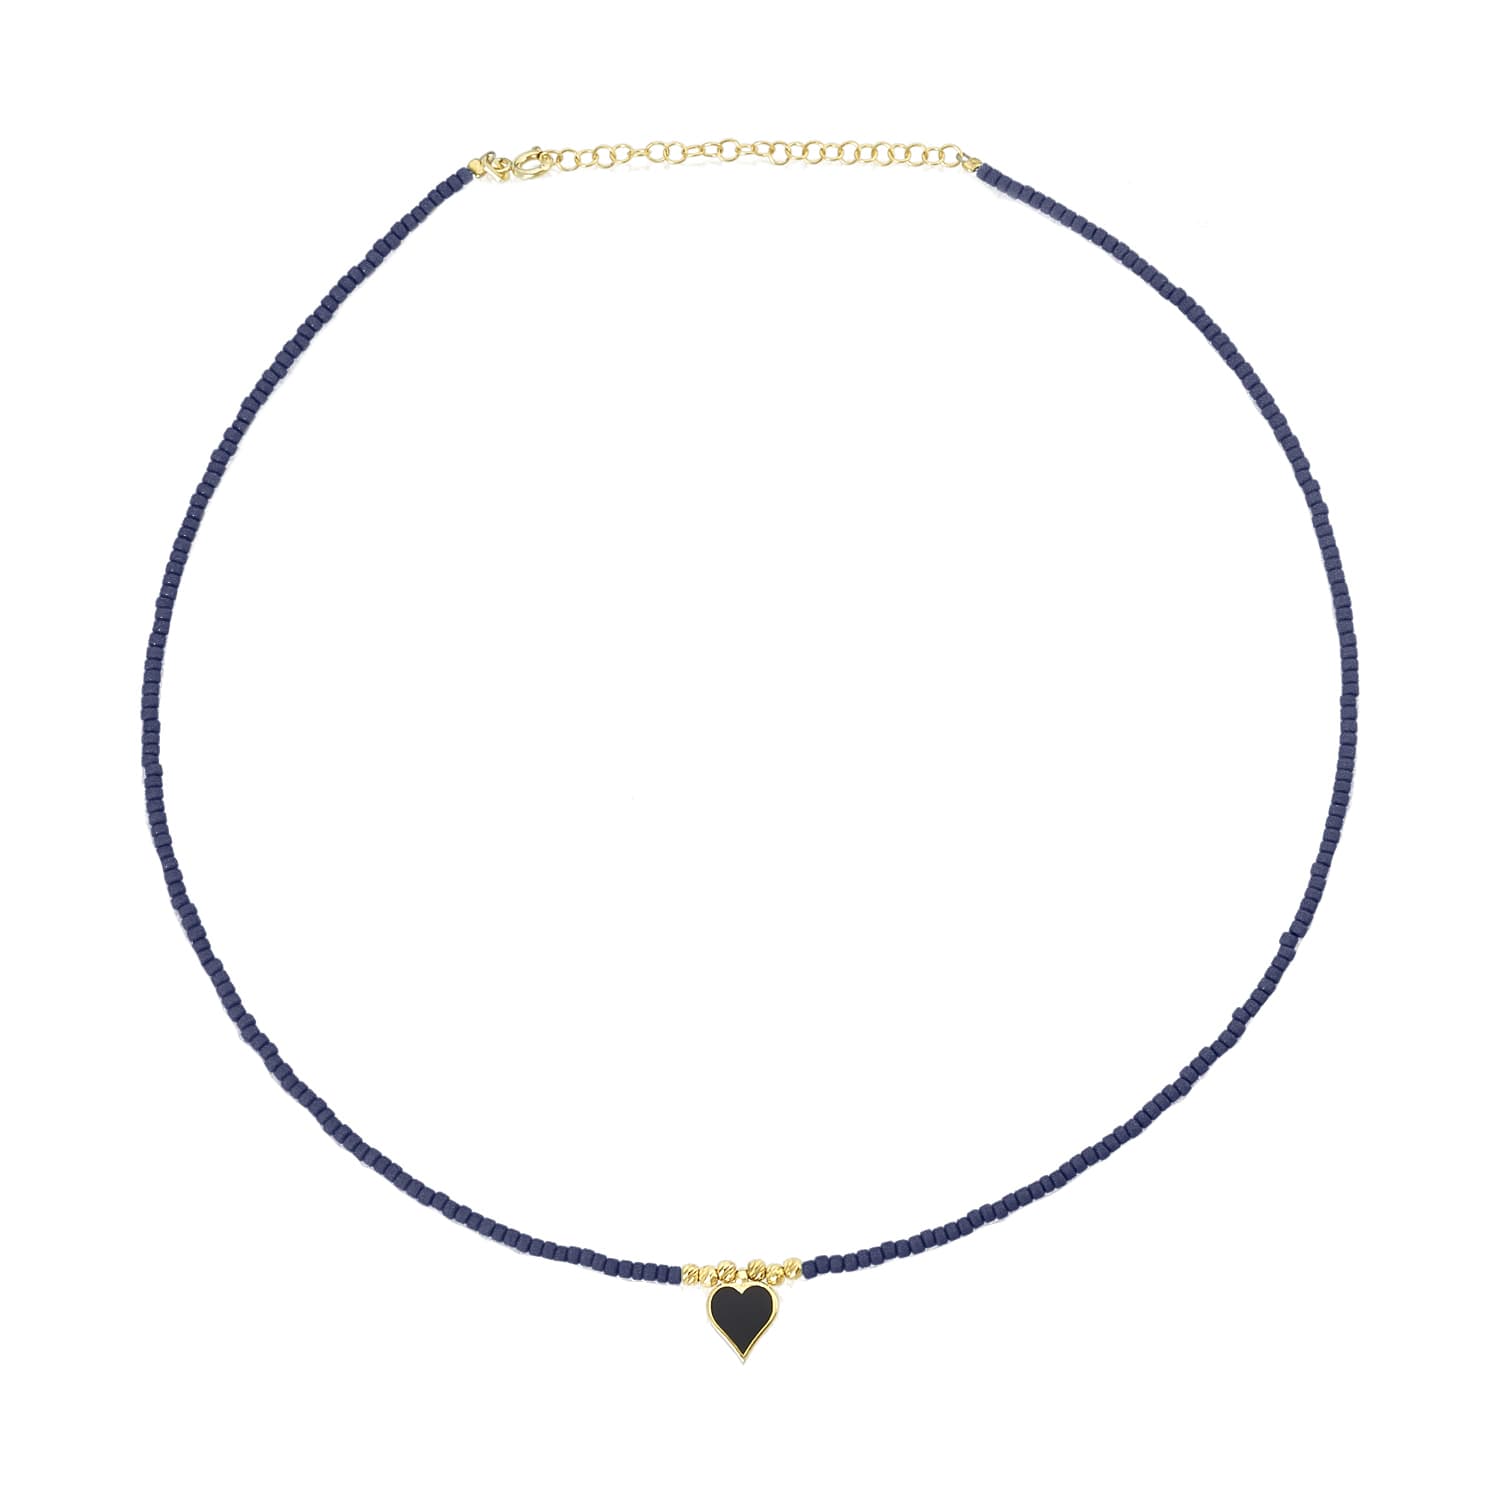 navy blue and black heart necklace